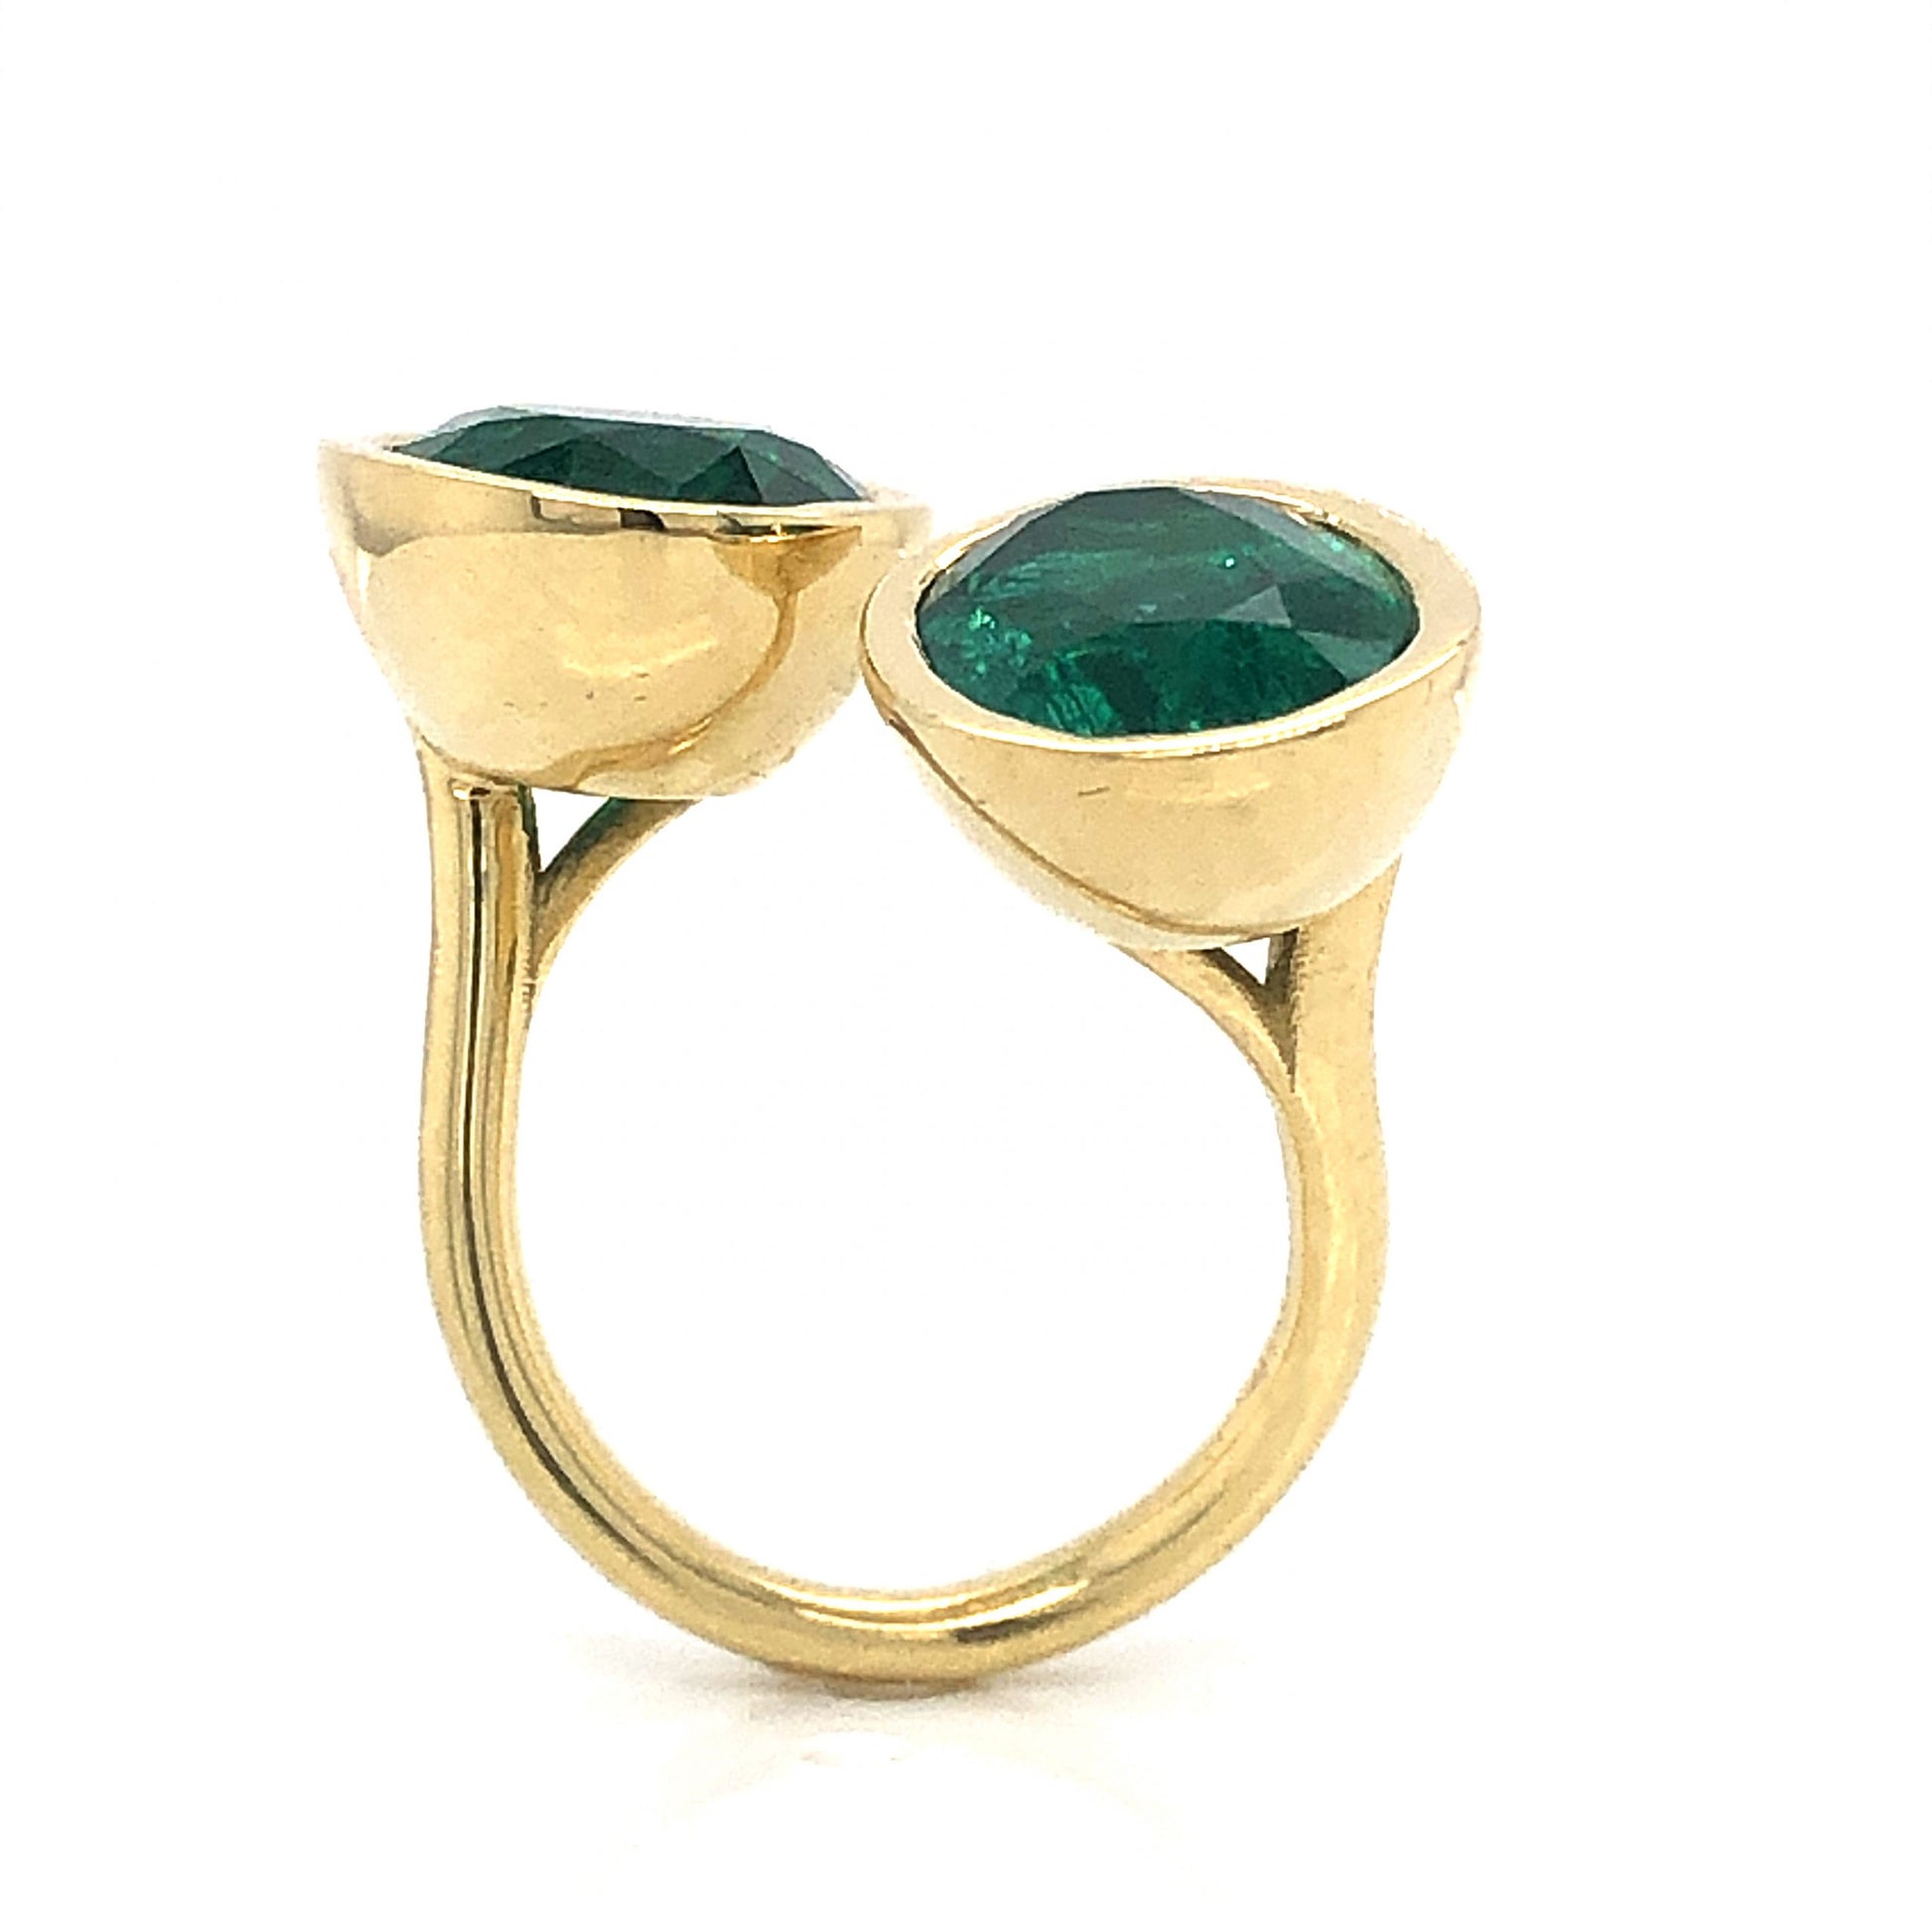 Double Oval Cut Emerald Cocktail Ring in 18k Yellow GoldComposition: 18 Karat Yellow Gold Ring Size: 7 Total Gram Weight: 11.1 g